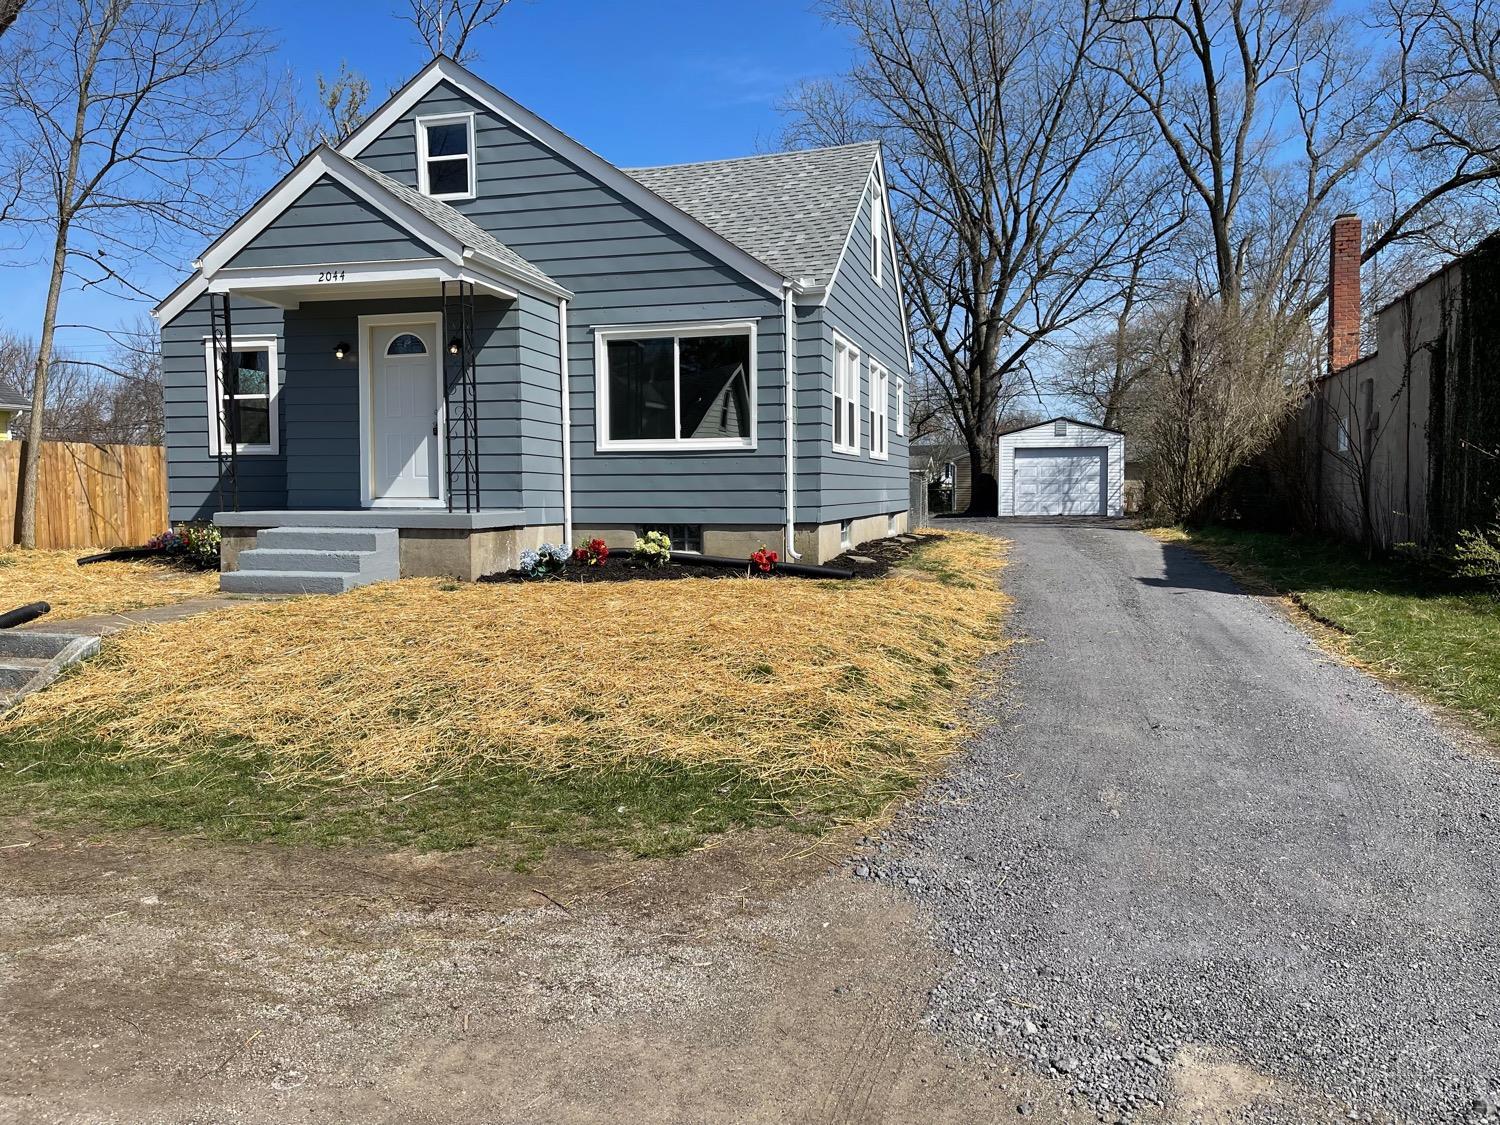 Welcome home to this remodeled 4 bedroom/2 bathroom Cape Cod situated on a quiet street. Conveniently located between Hamilton's east/west sides and Trenton. Updates include; new flooring, paint, updated bathrooms and kitchen. New HVAC, and water heater. Surprisingly spacious and move-in ready.